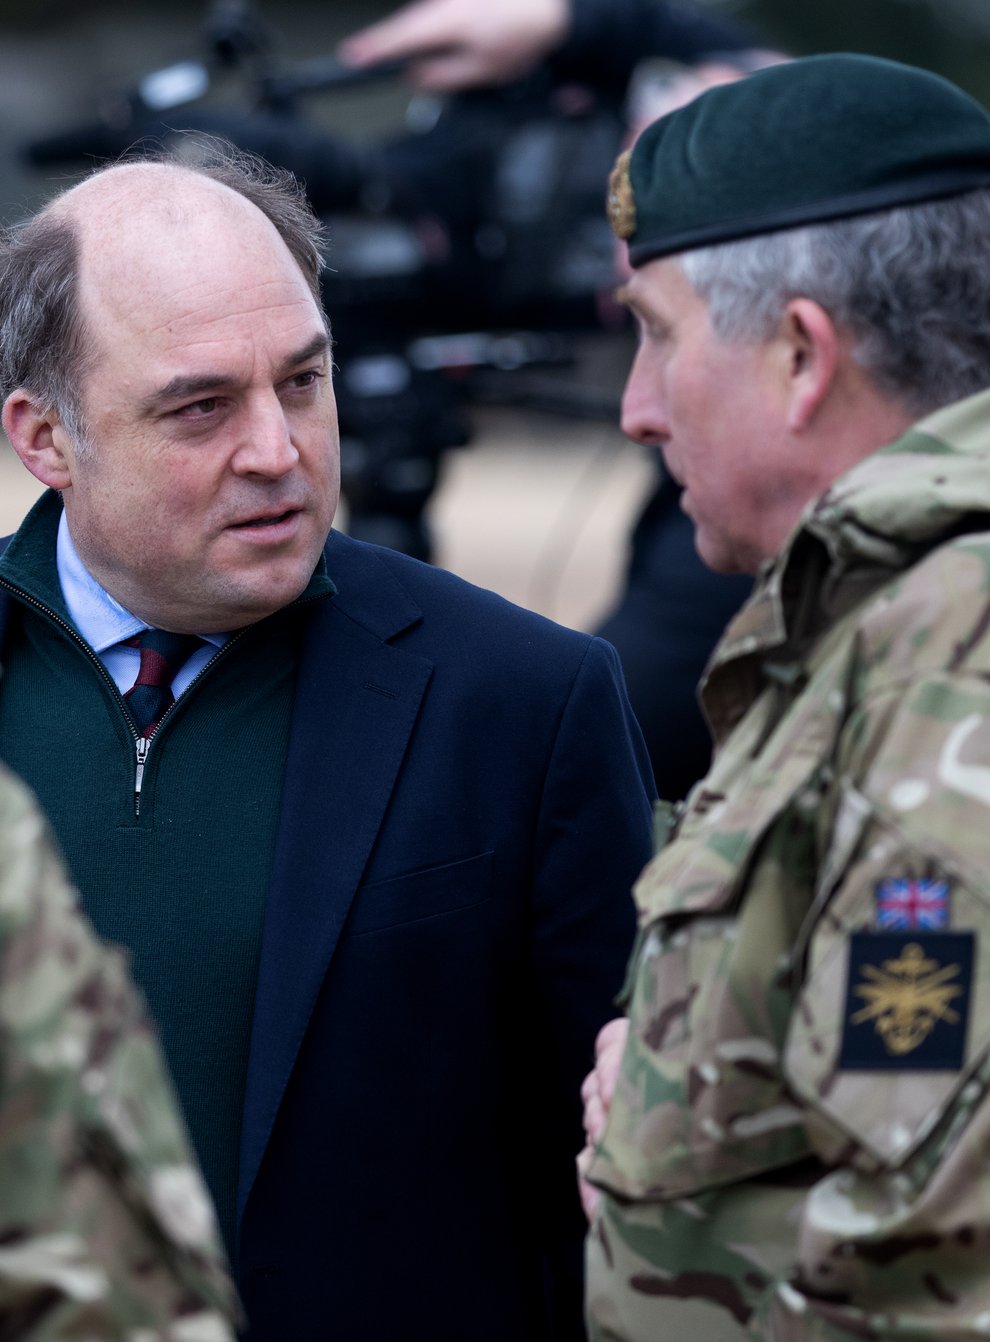 Defence Secretary Ben Wallace chats with Chief of the Defence Staff, General Sir Nick Carter (right) after a live exercise demonstration at Bovington Camp in Dorset